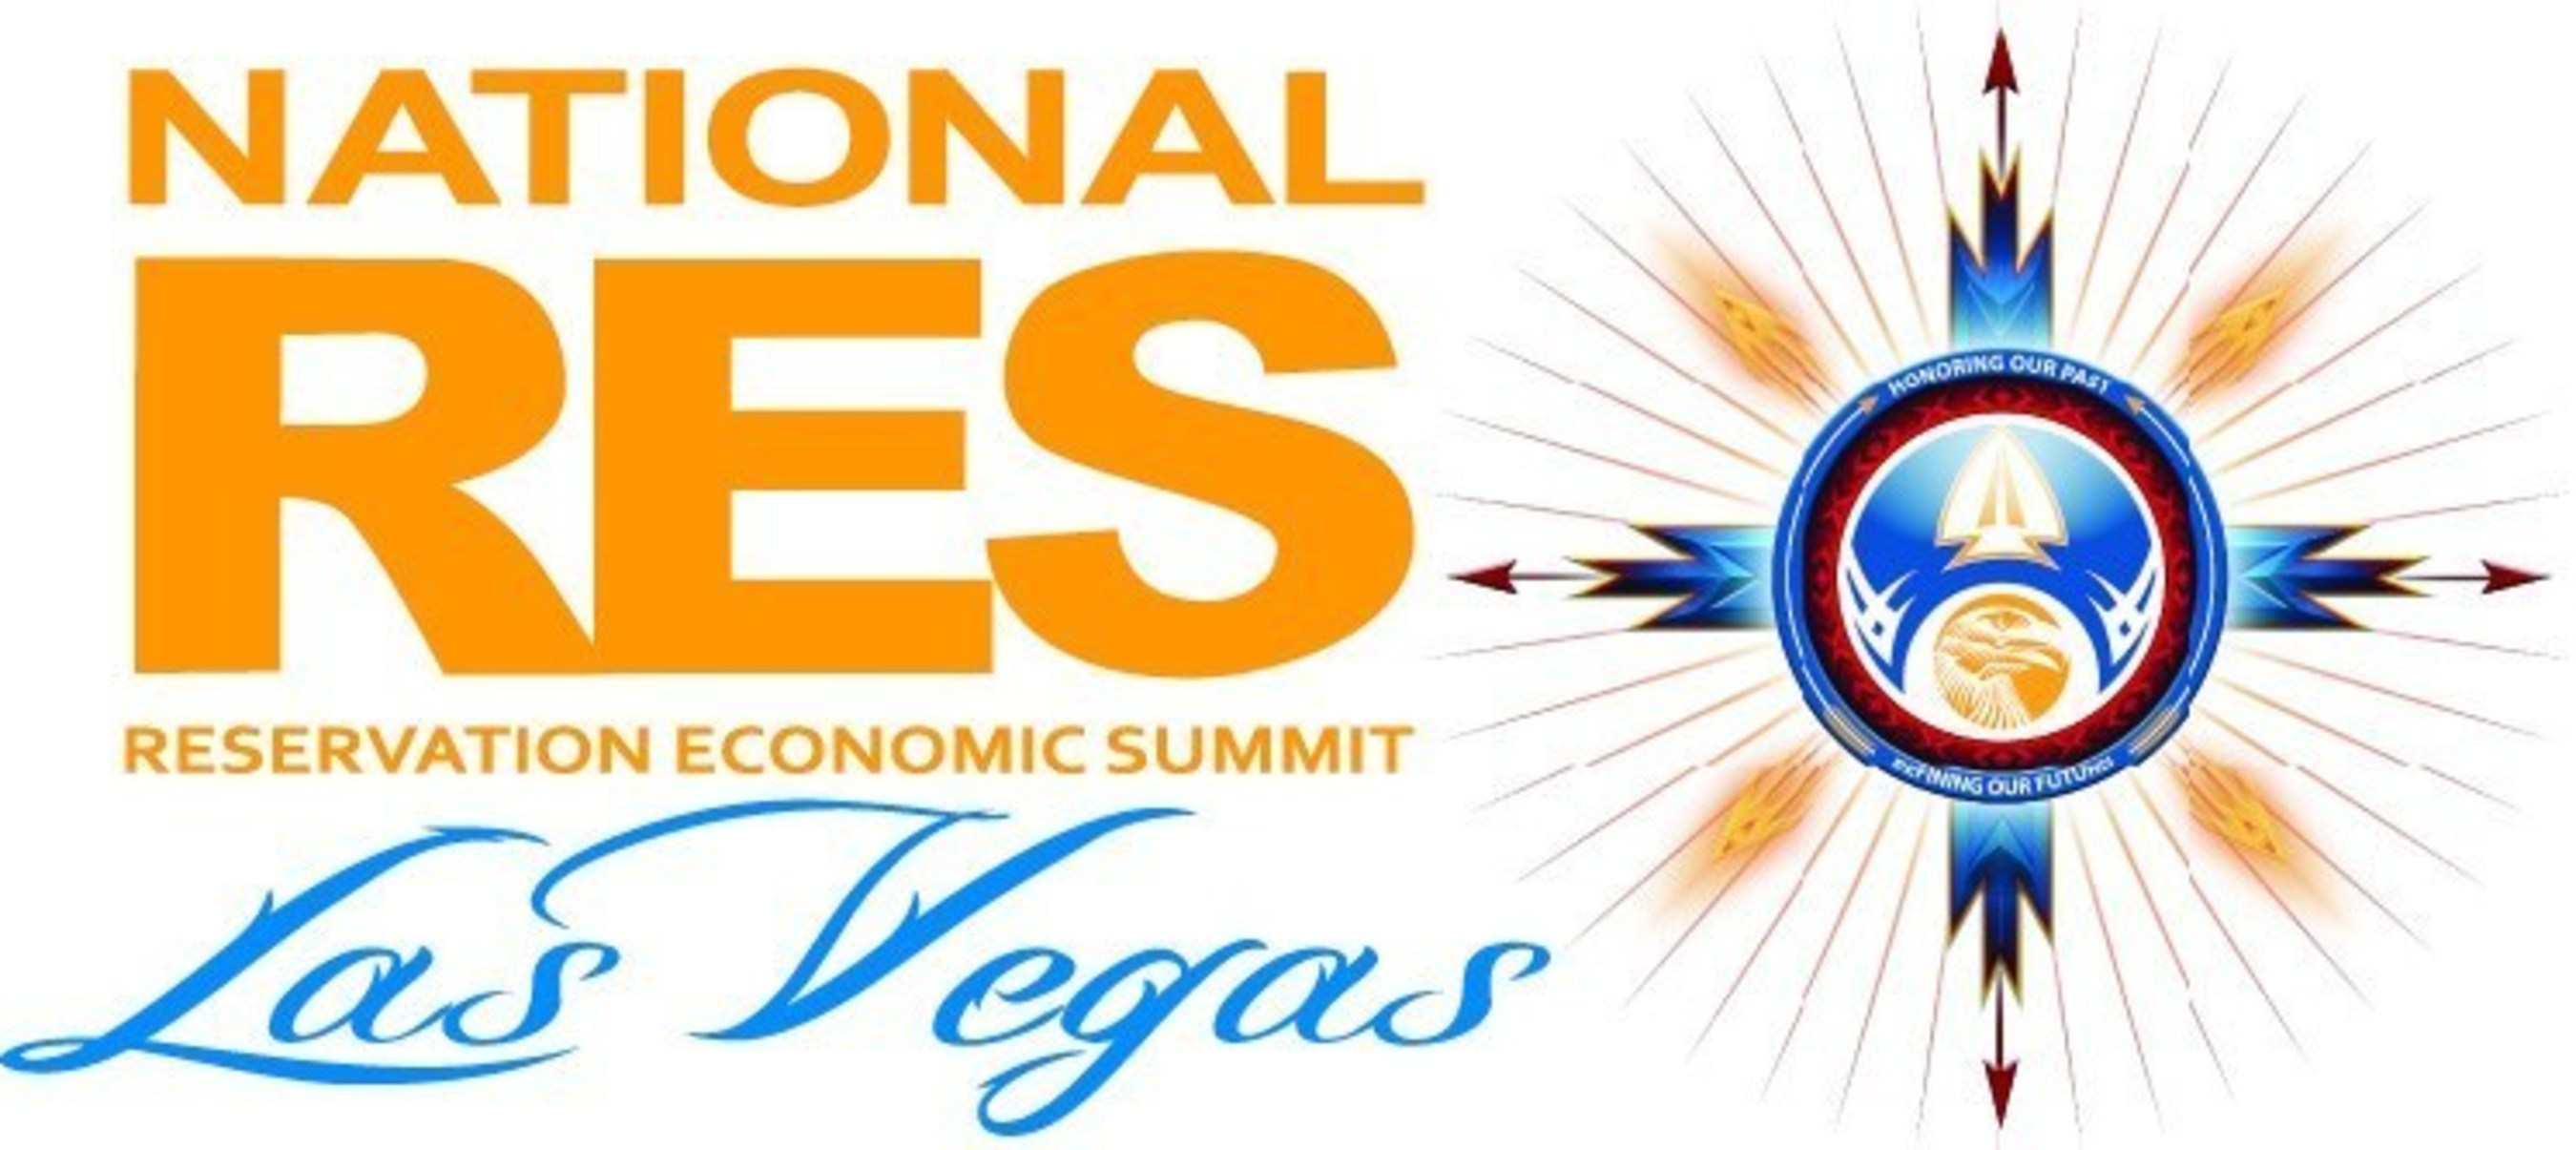 the National Reservation Economic Summit will take place at the Mandalay Bay Resort and Casino in Las Vegas from March 9 - 12.